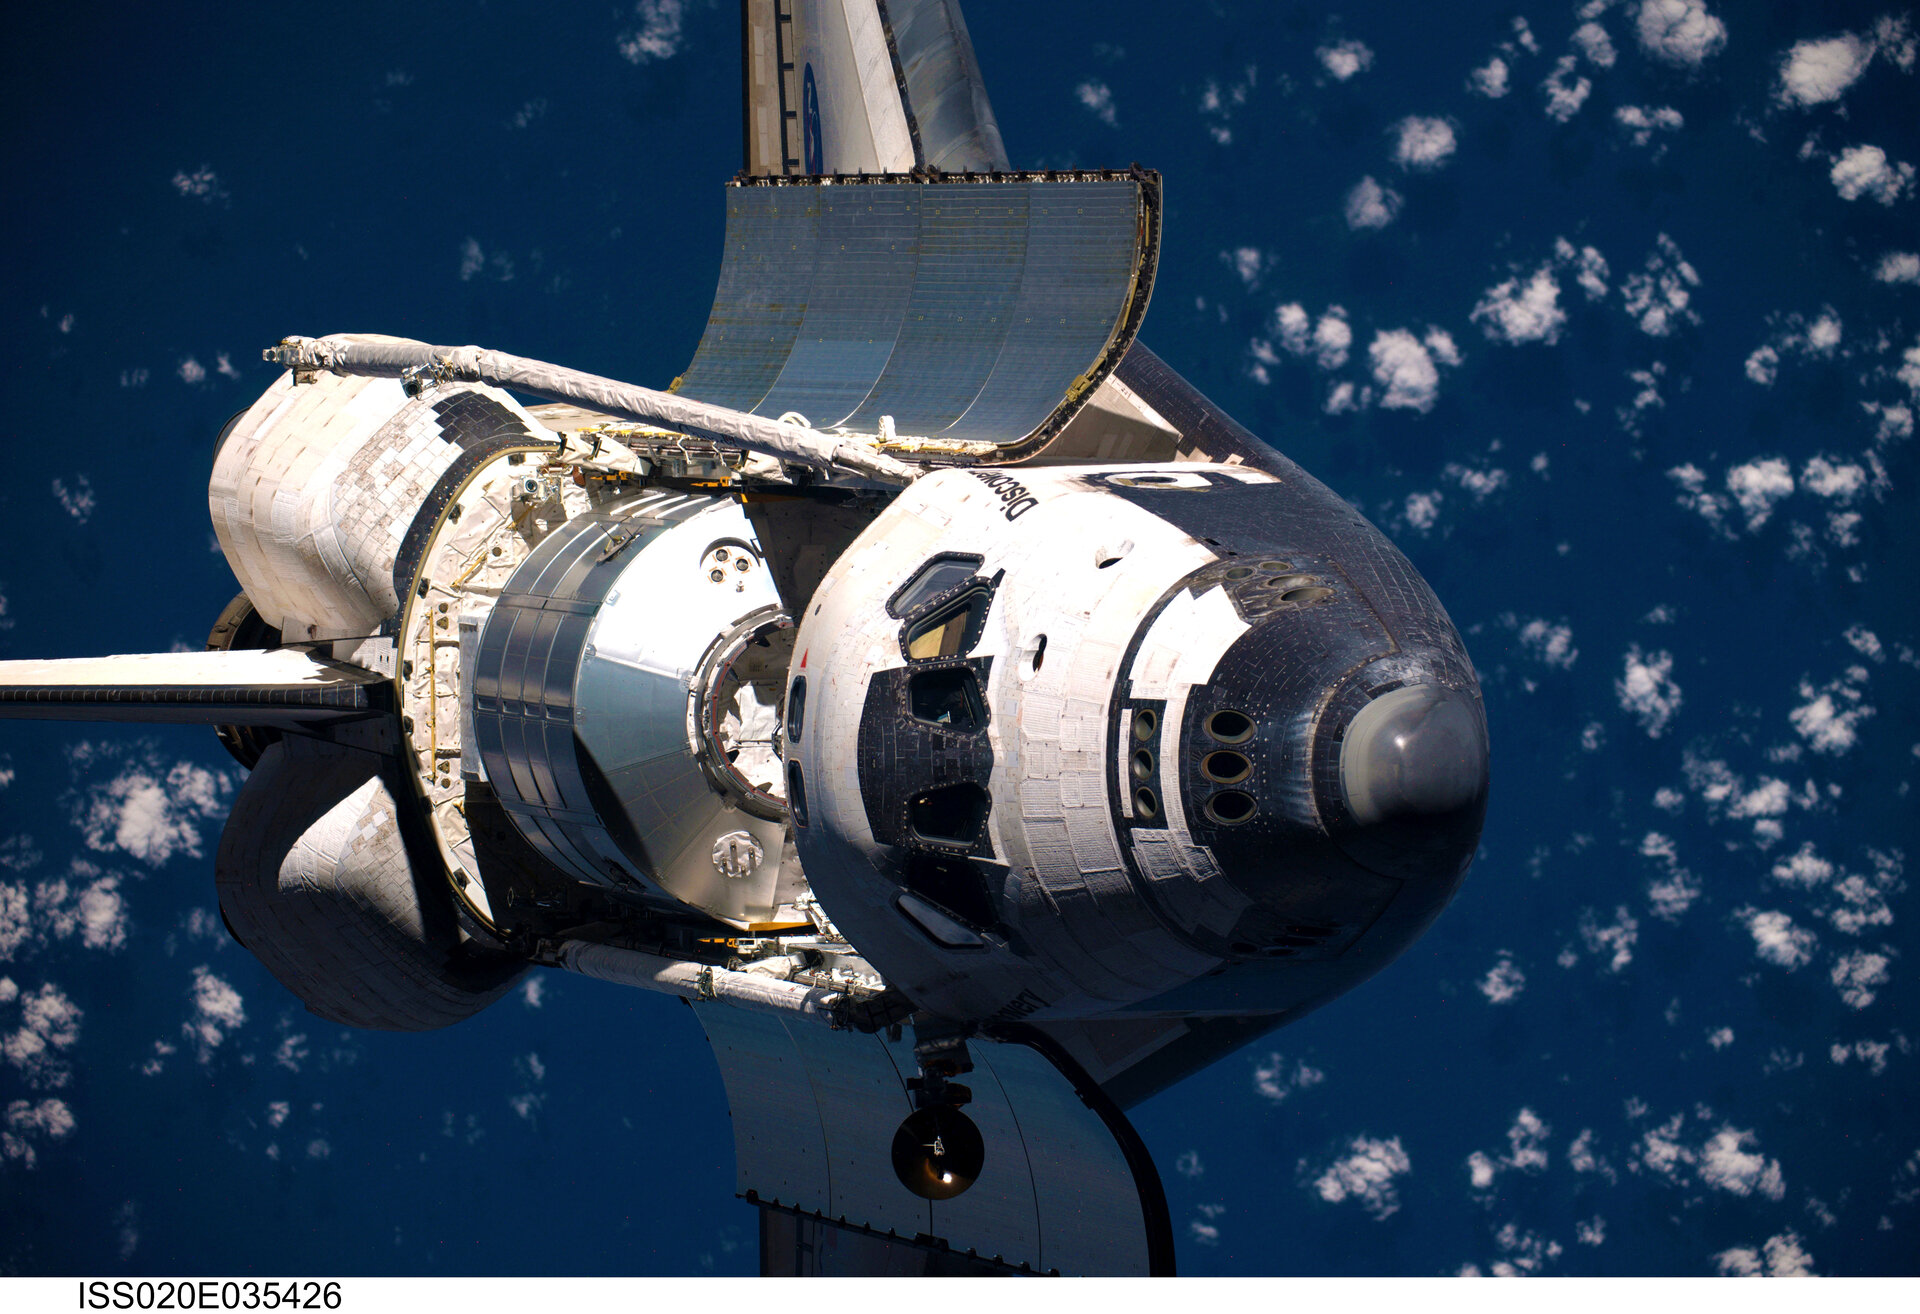 Space Shuttle Discovery before docking with the ISS